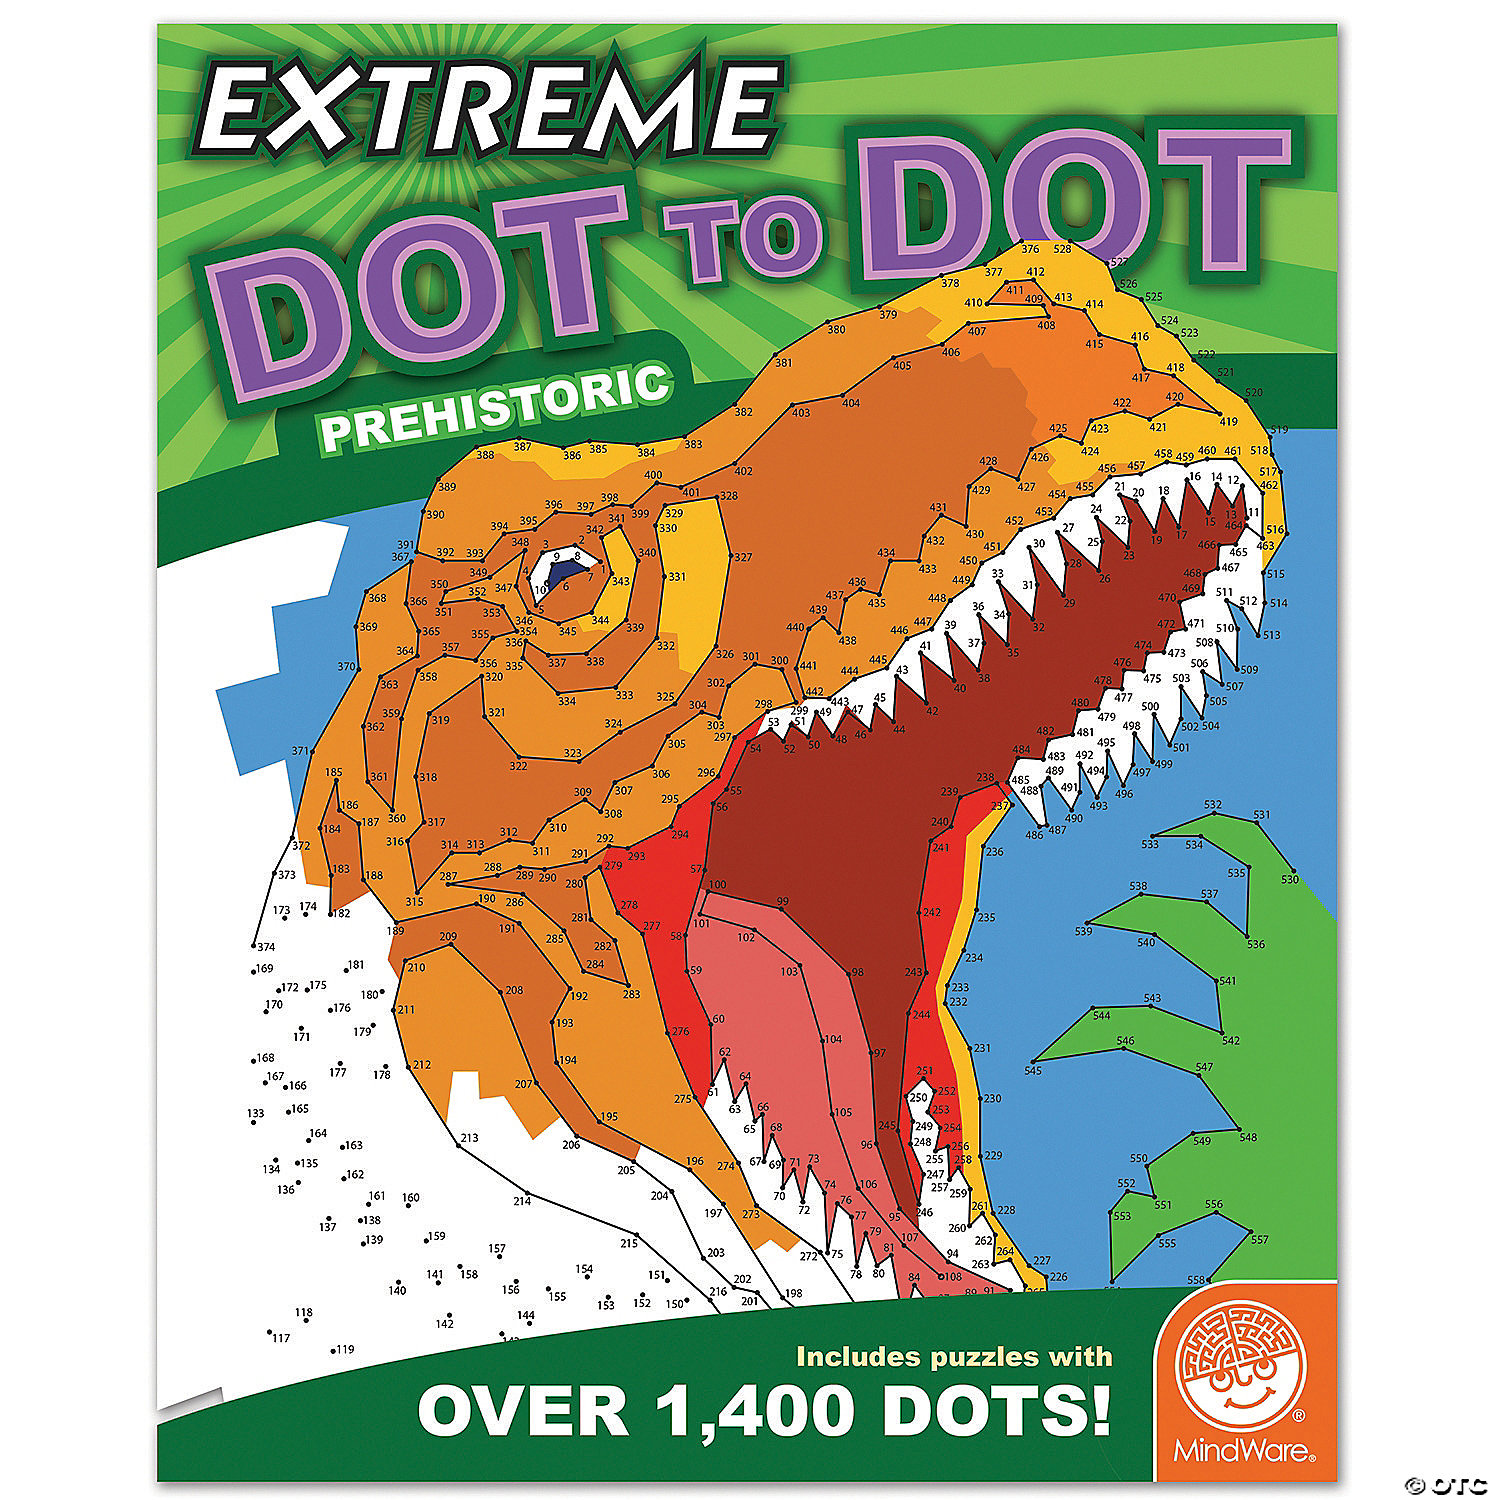 Extreme Dot to Dot Puzzle and Colouring Book MindWare 